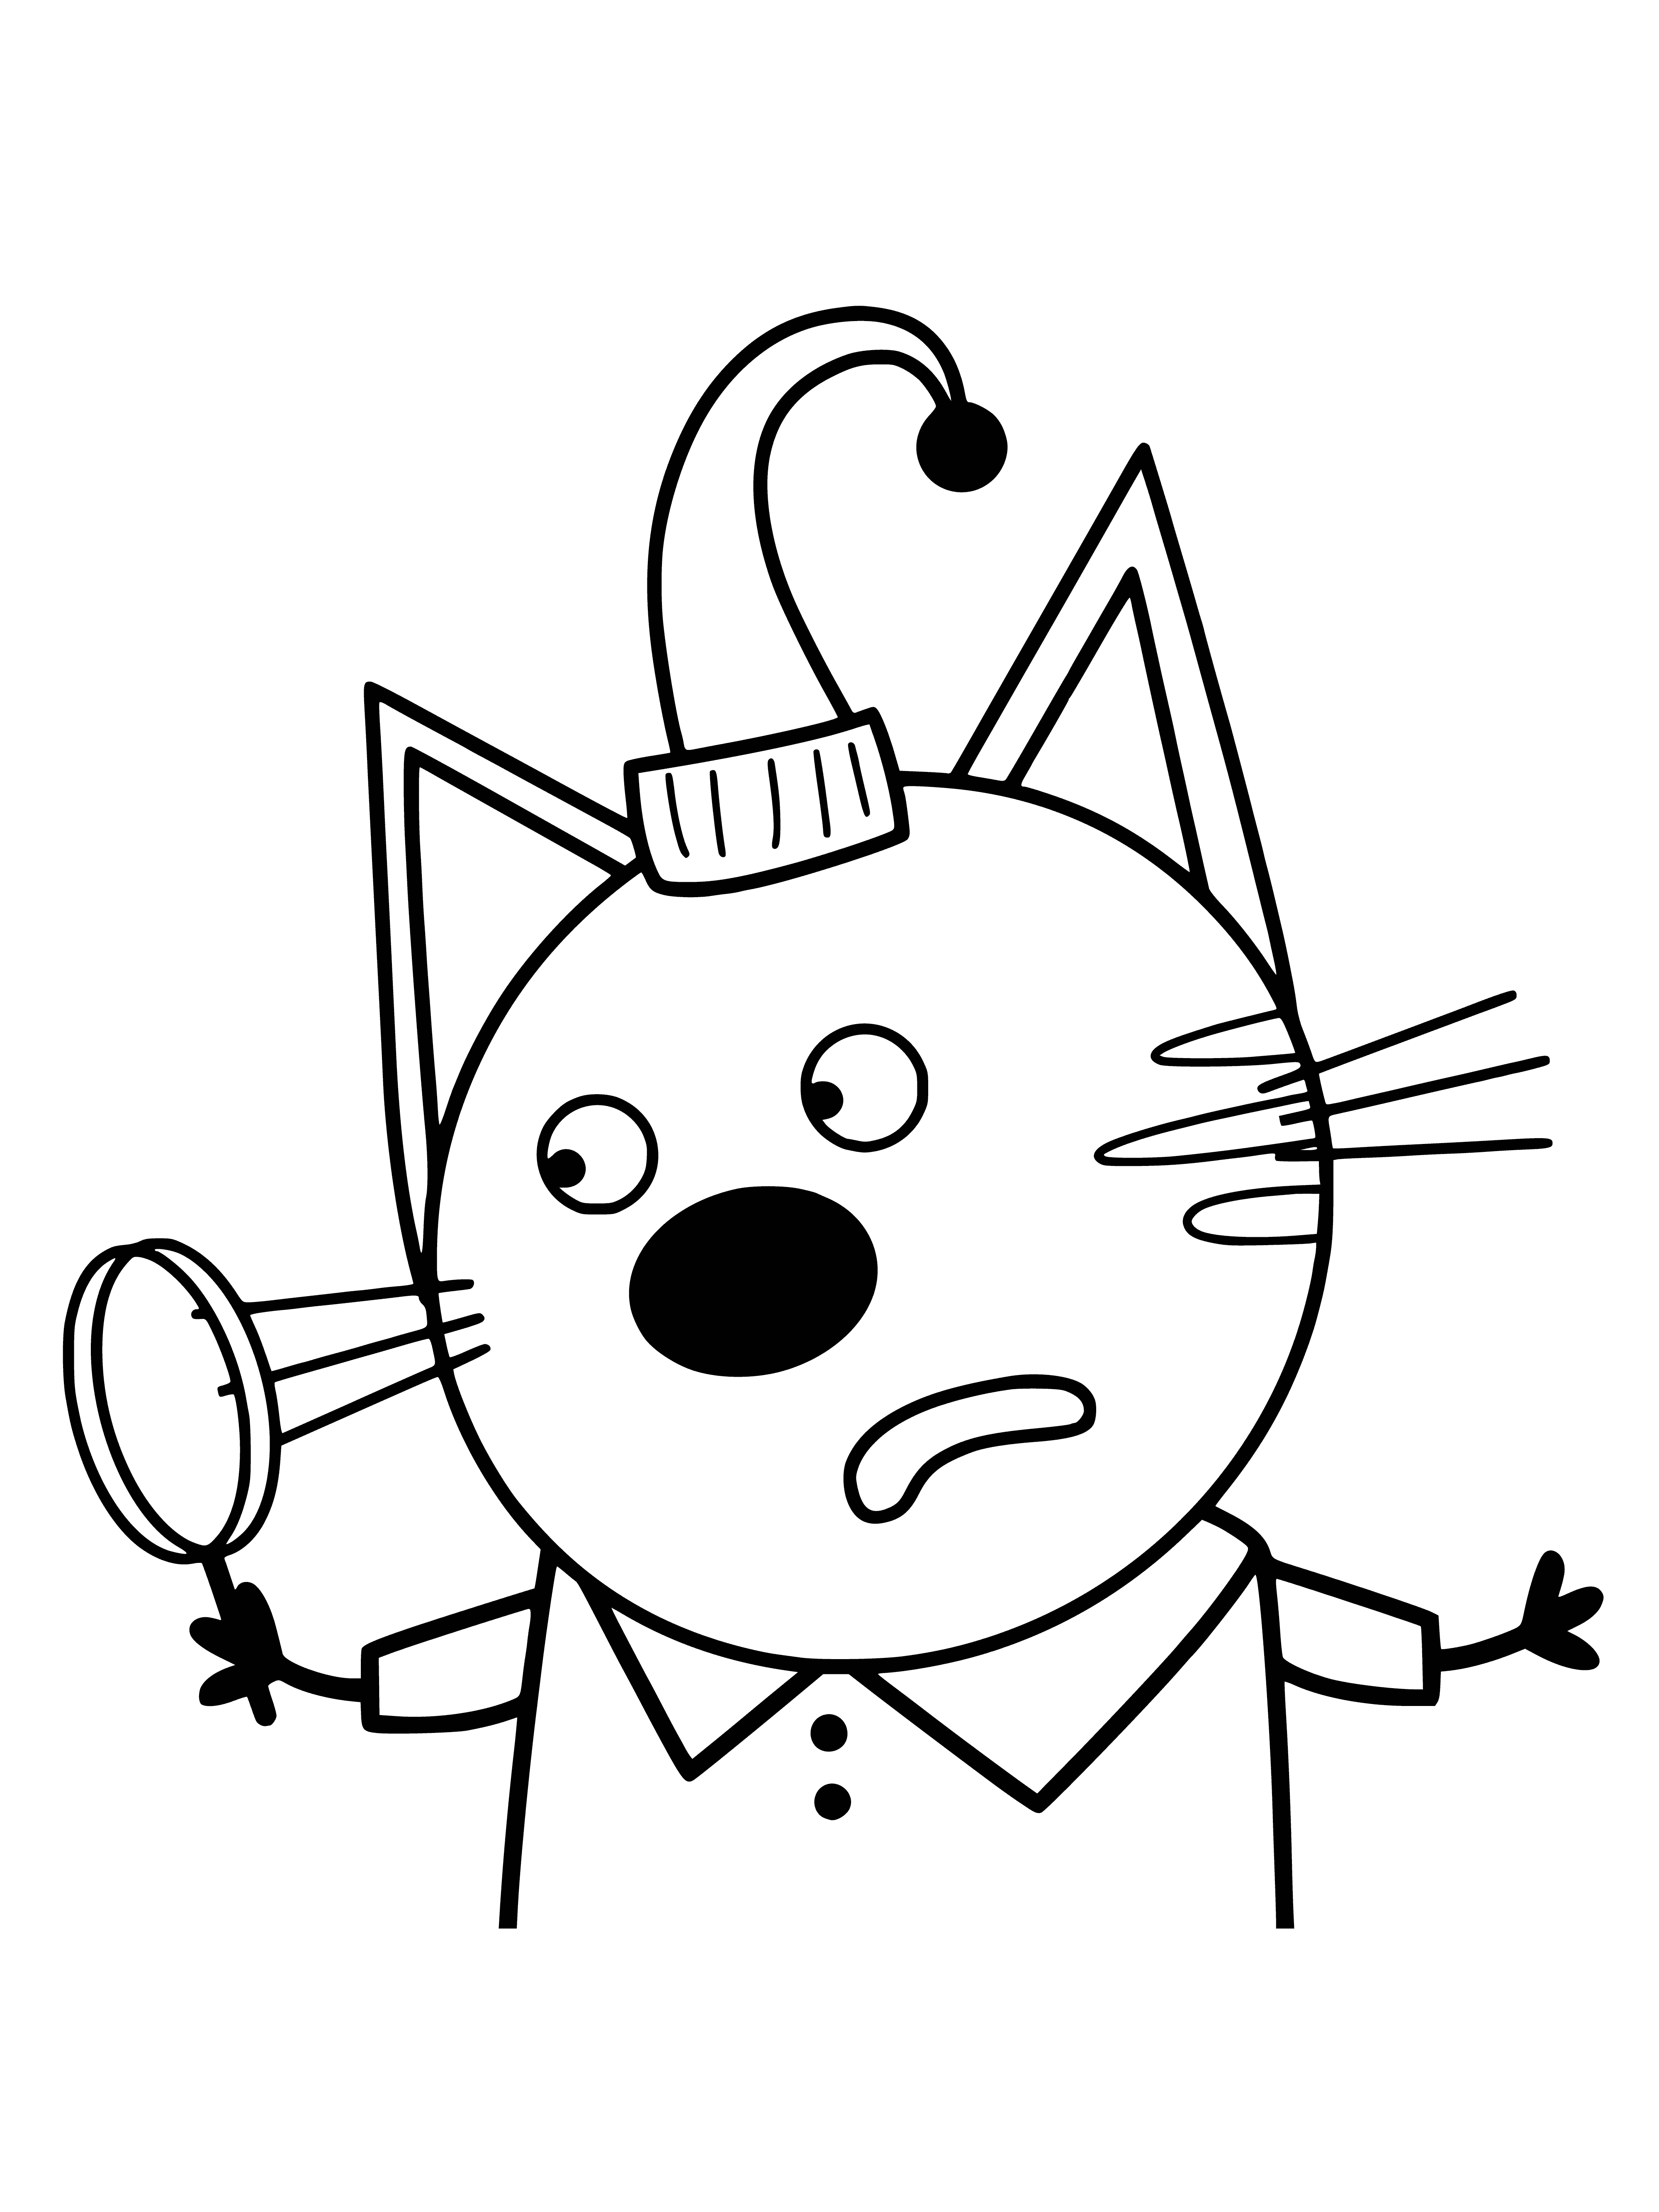 coloring page: 3 cats with 3 different fur colors check out a bowl of compote, trying to figure out what's inside. #cats #coloringpage #compote